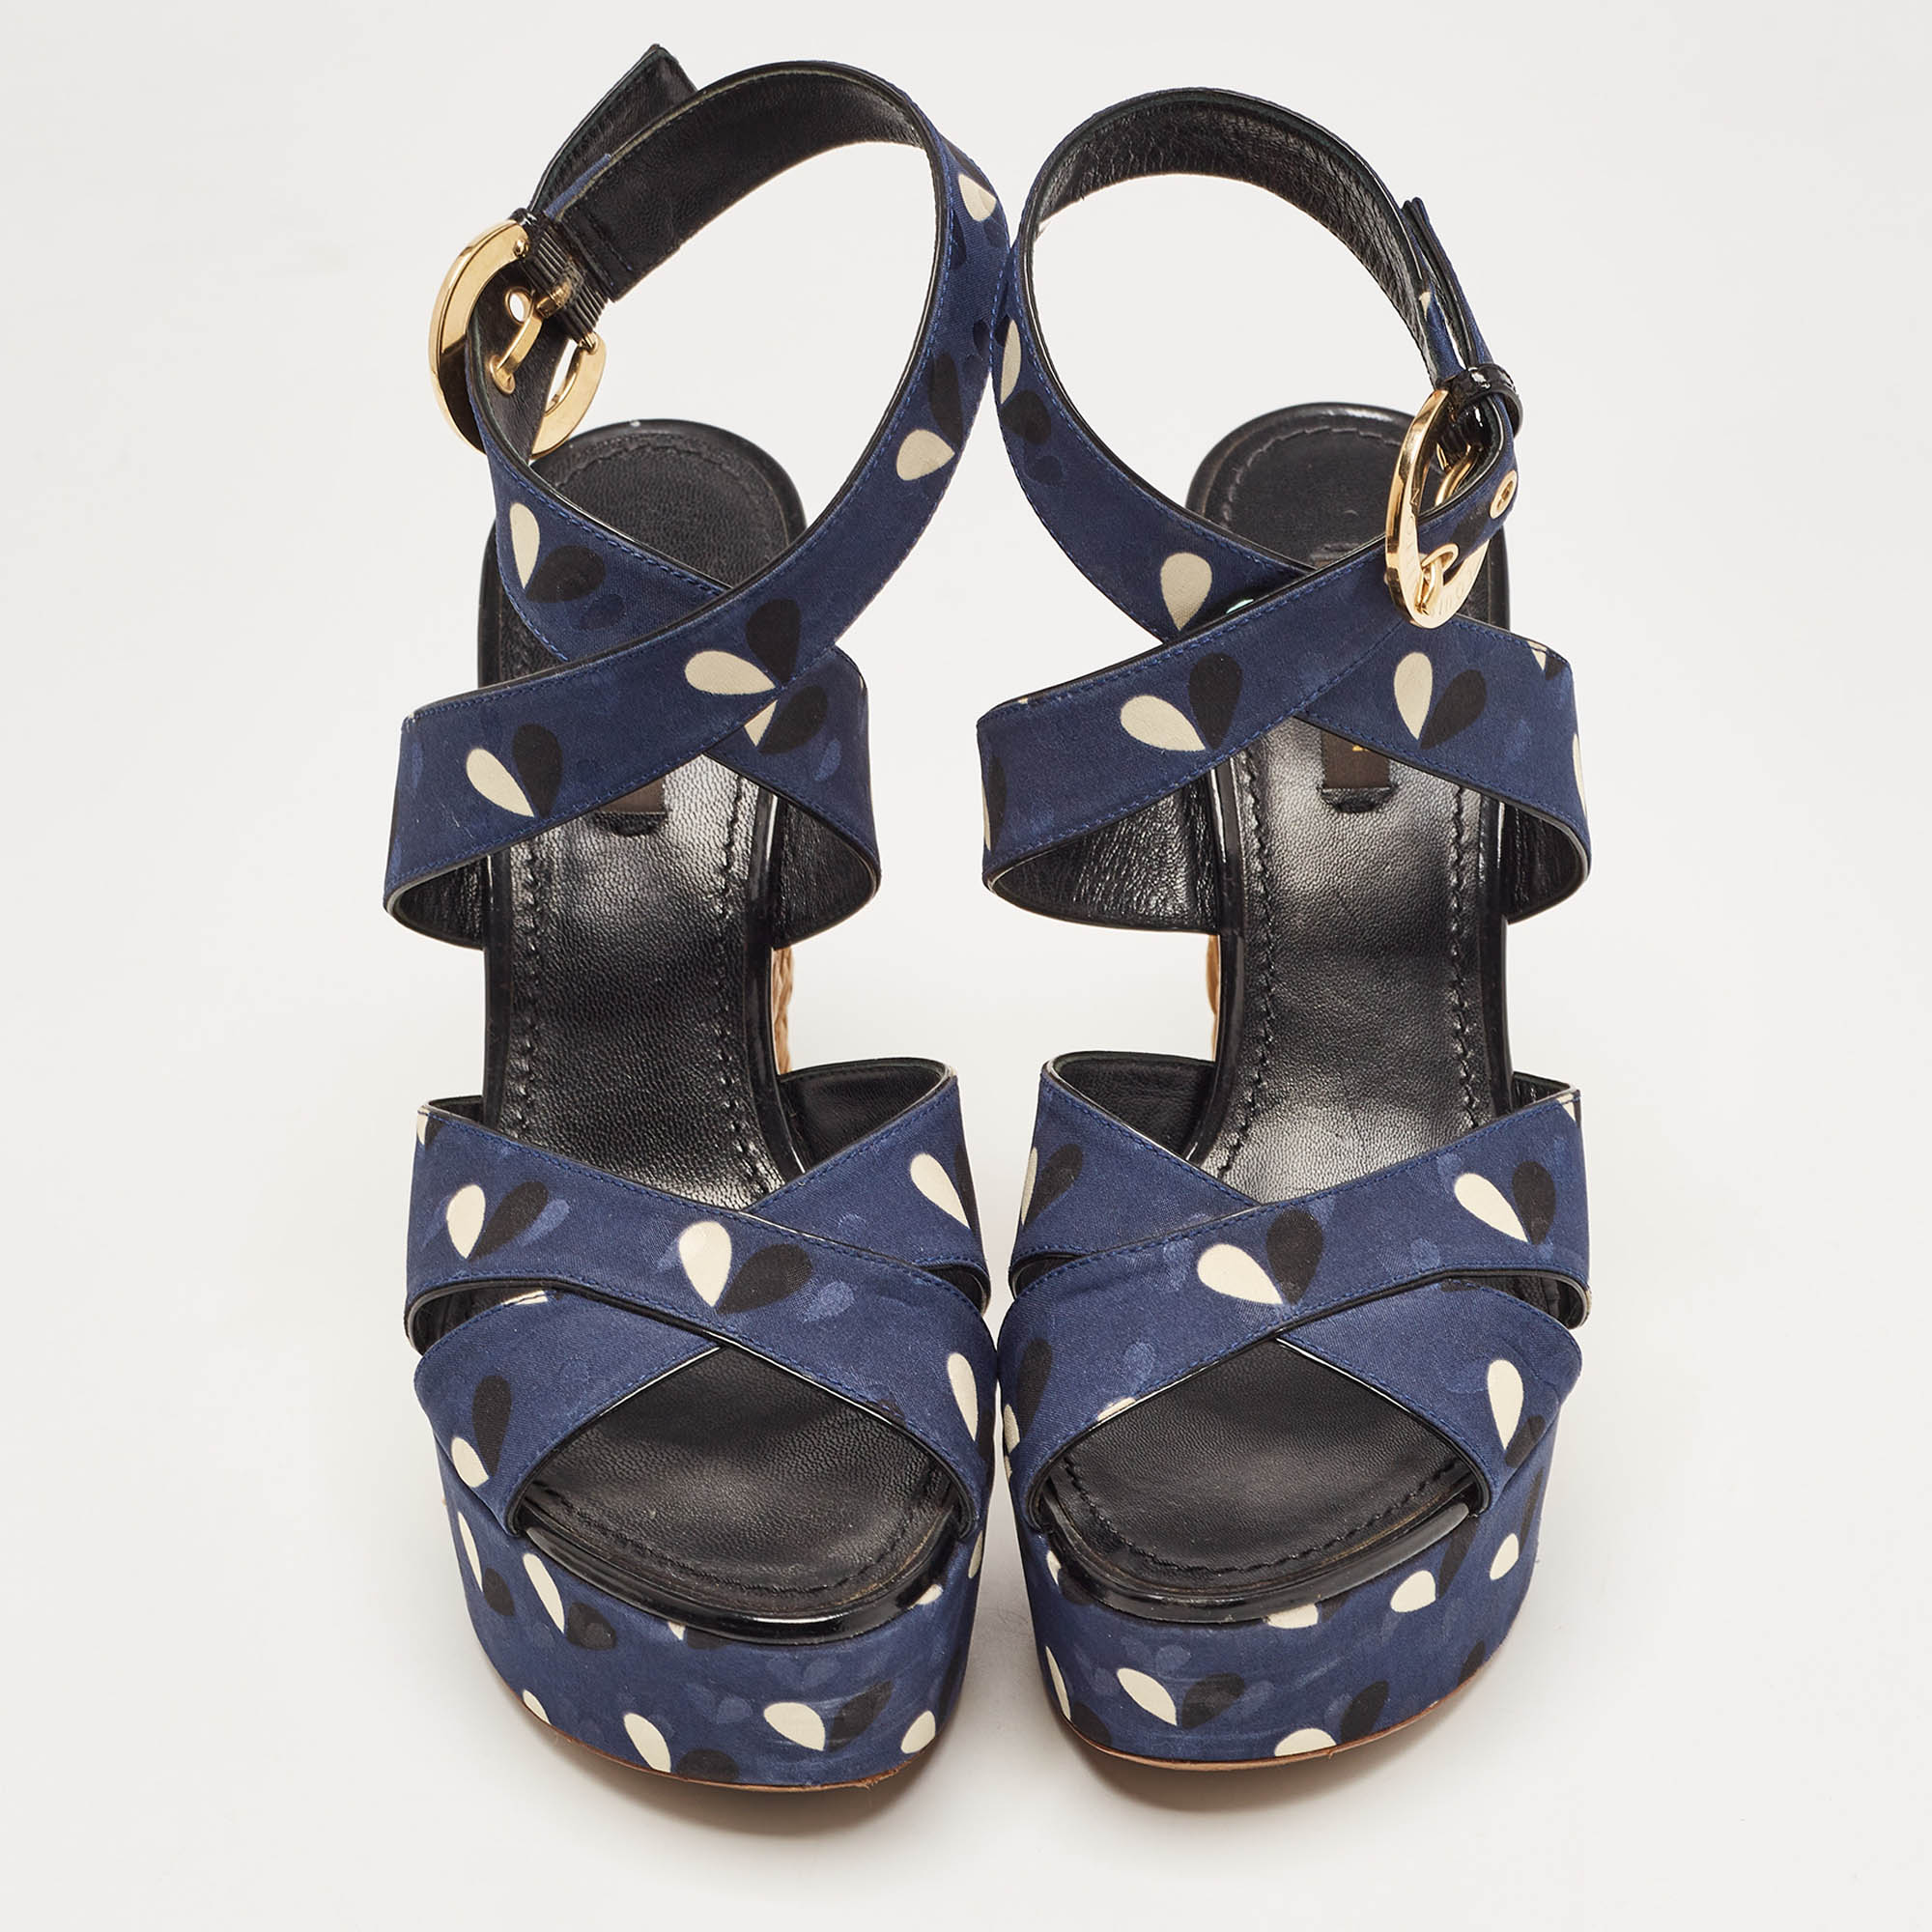 Louis Vuitton Navy Blue Printed Fabric Espadrille Wedge Ankle Wrap Sandals Size 38